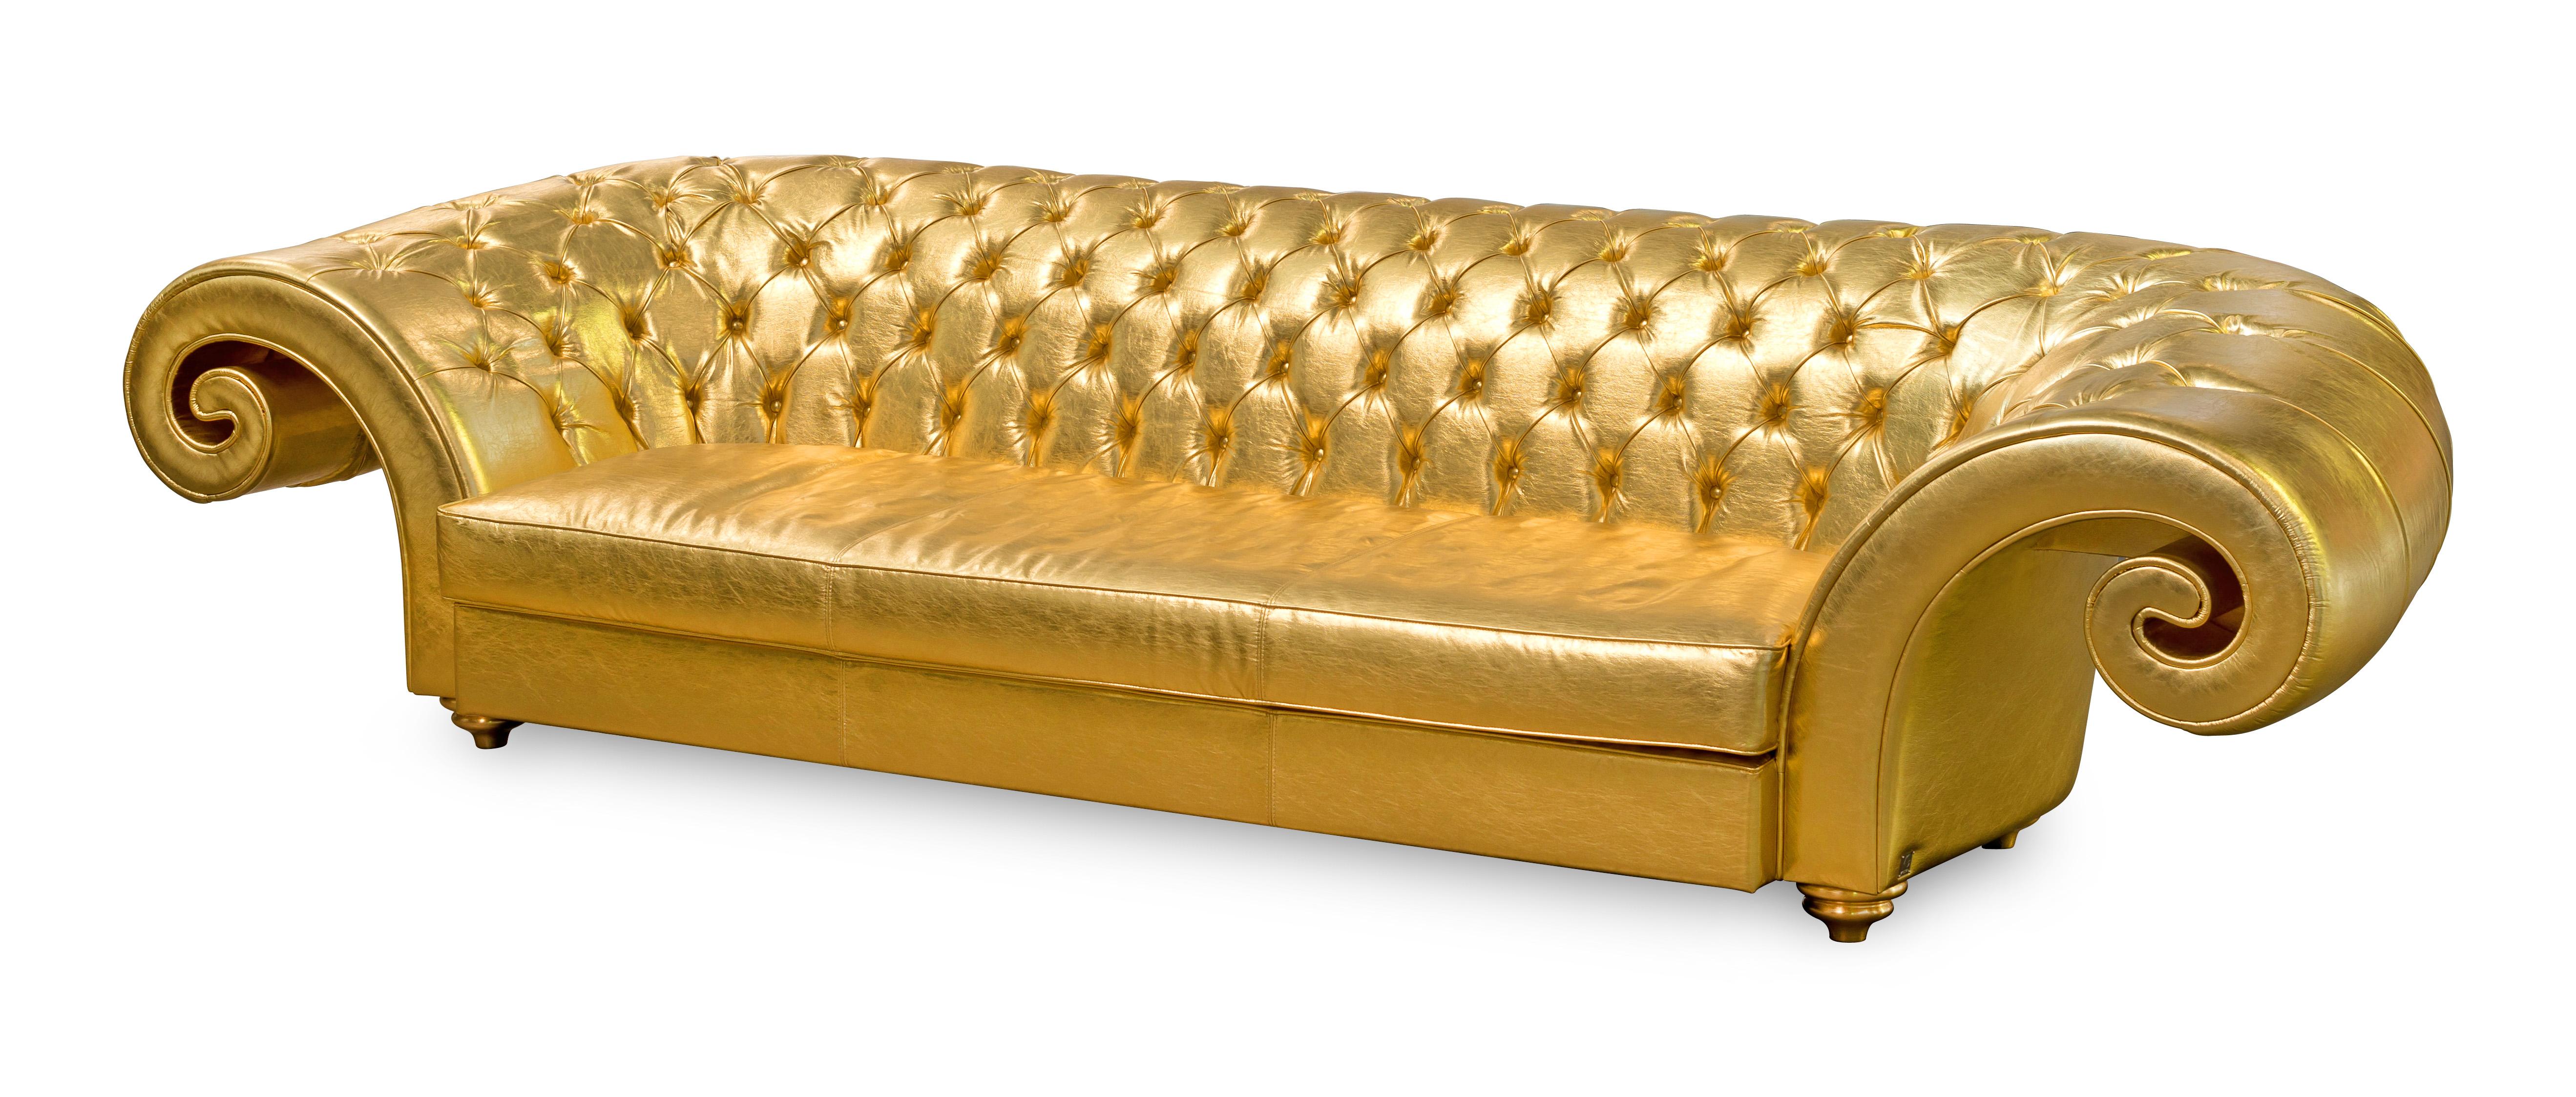 Gold Leather Couch - 18 For Sale on 1stDibs | metallic gold leather sofa,  gold leather sofa, antique gold leather sofa